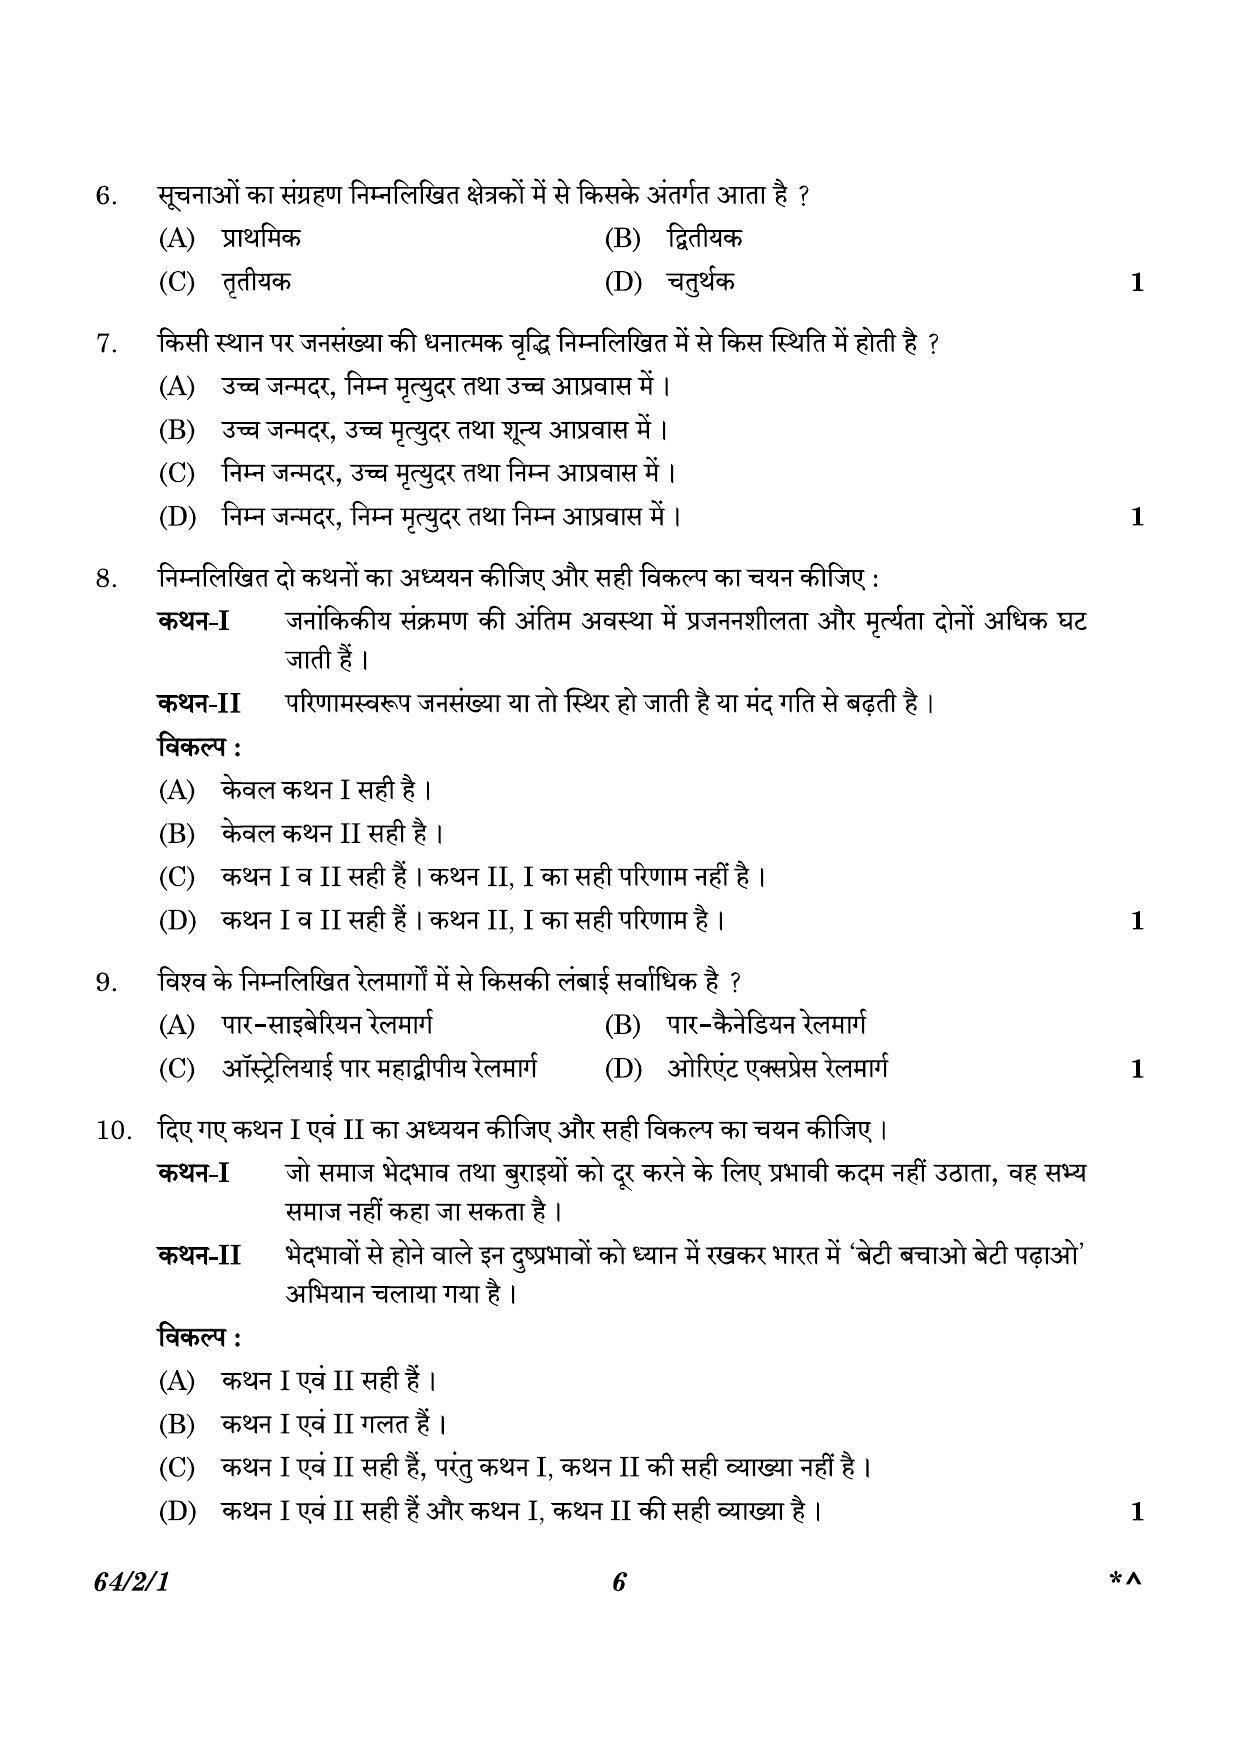 CBSE Class 12 64-2-1 Geography 2023 Question Paper - Page 6